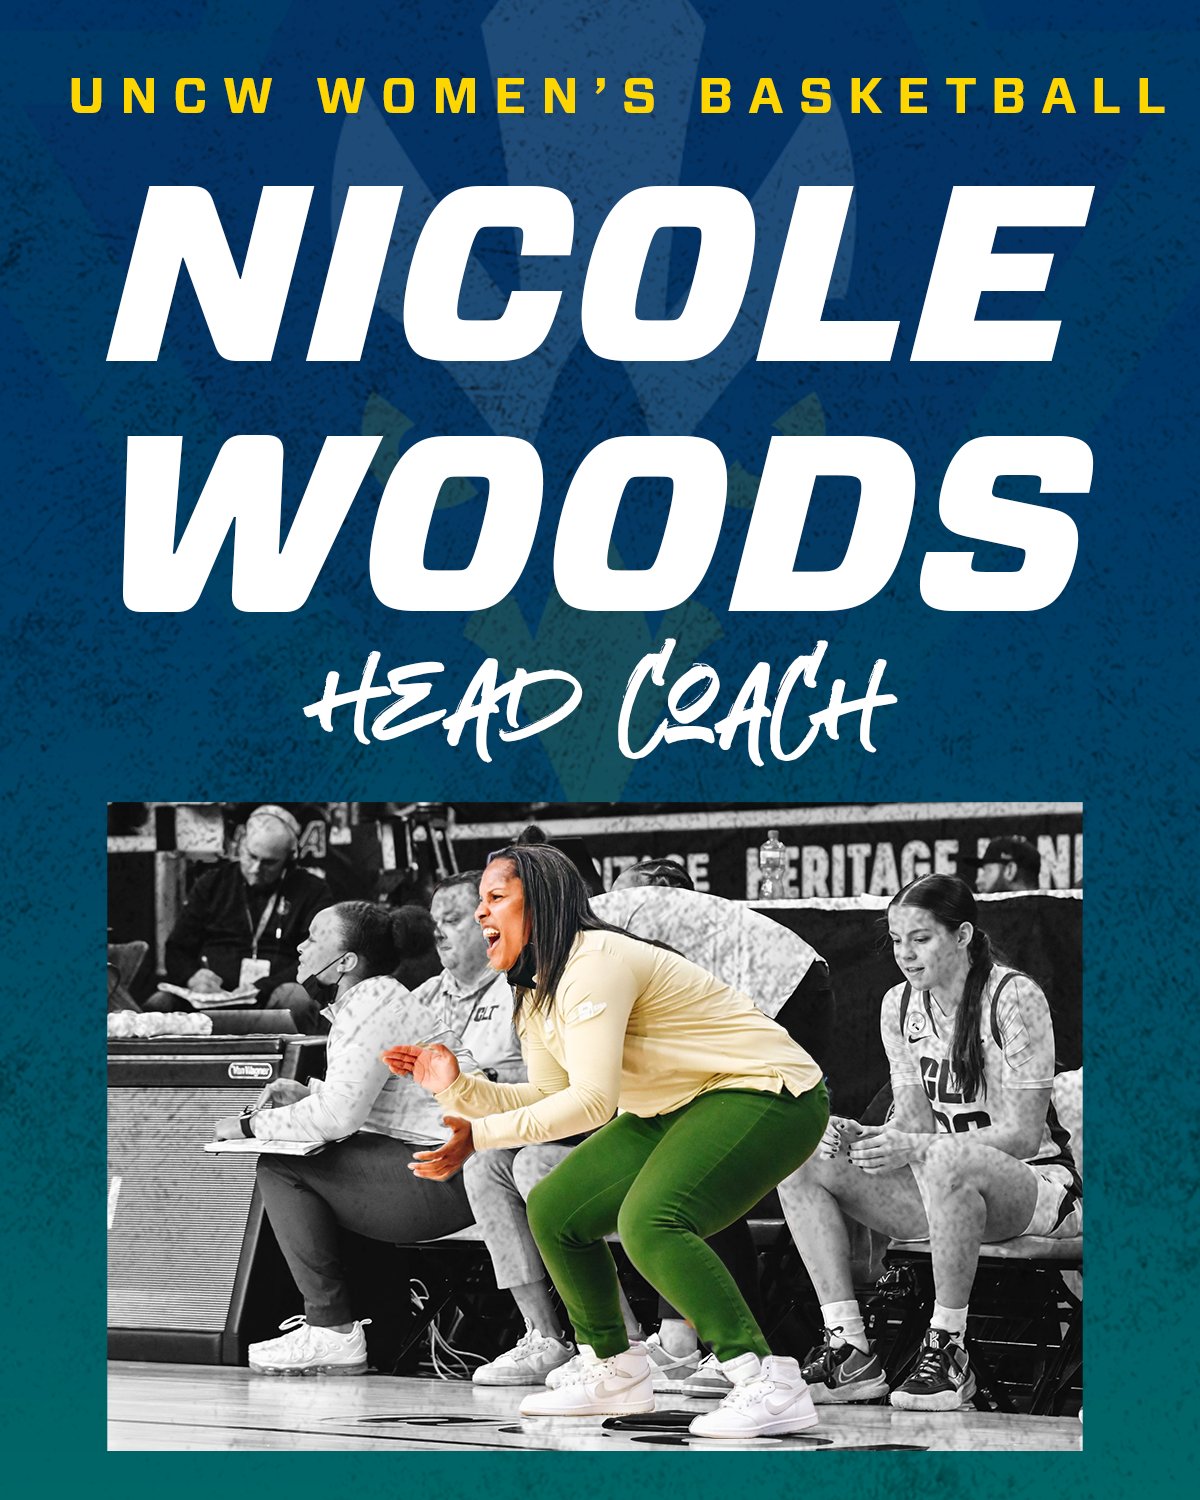 Nicole Woods Named Head Coach at UNC Wilmington